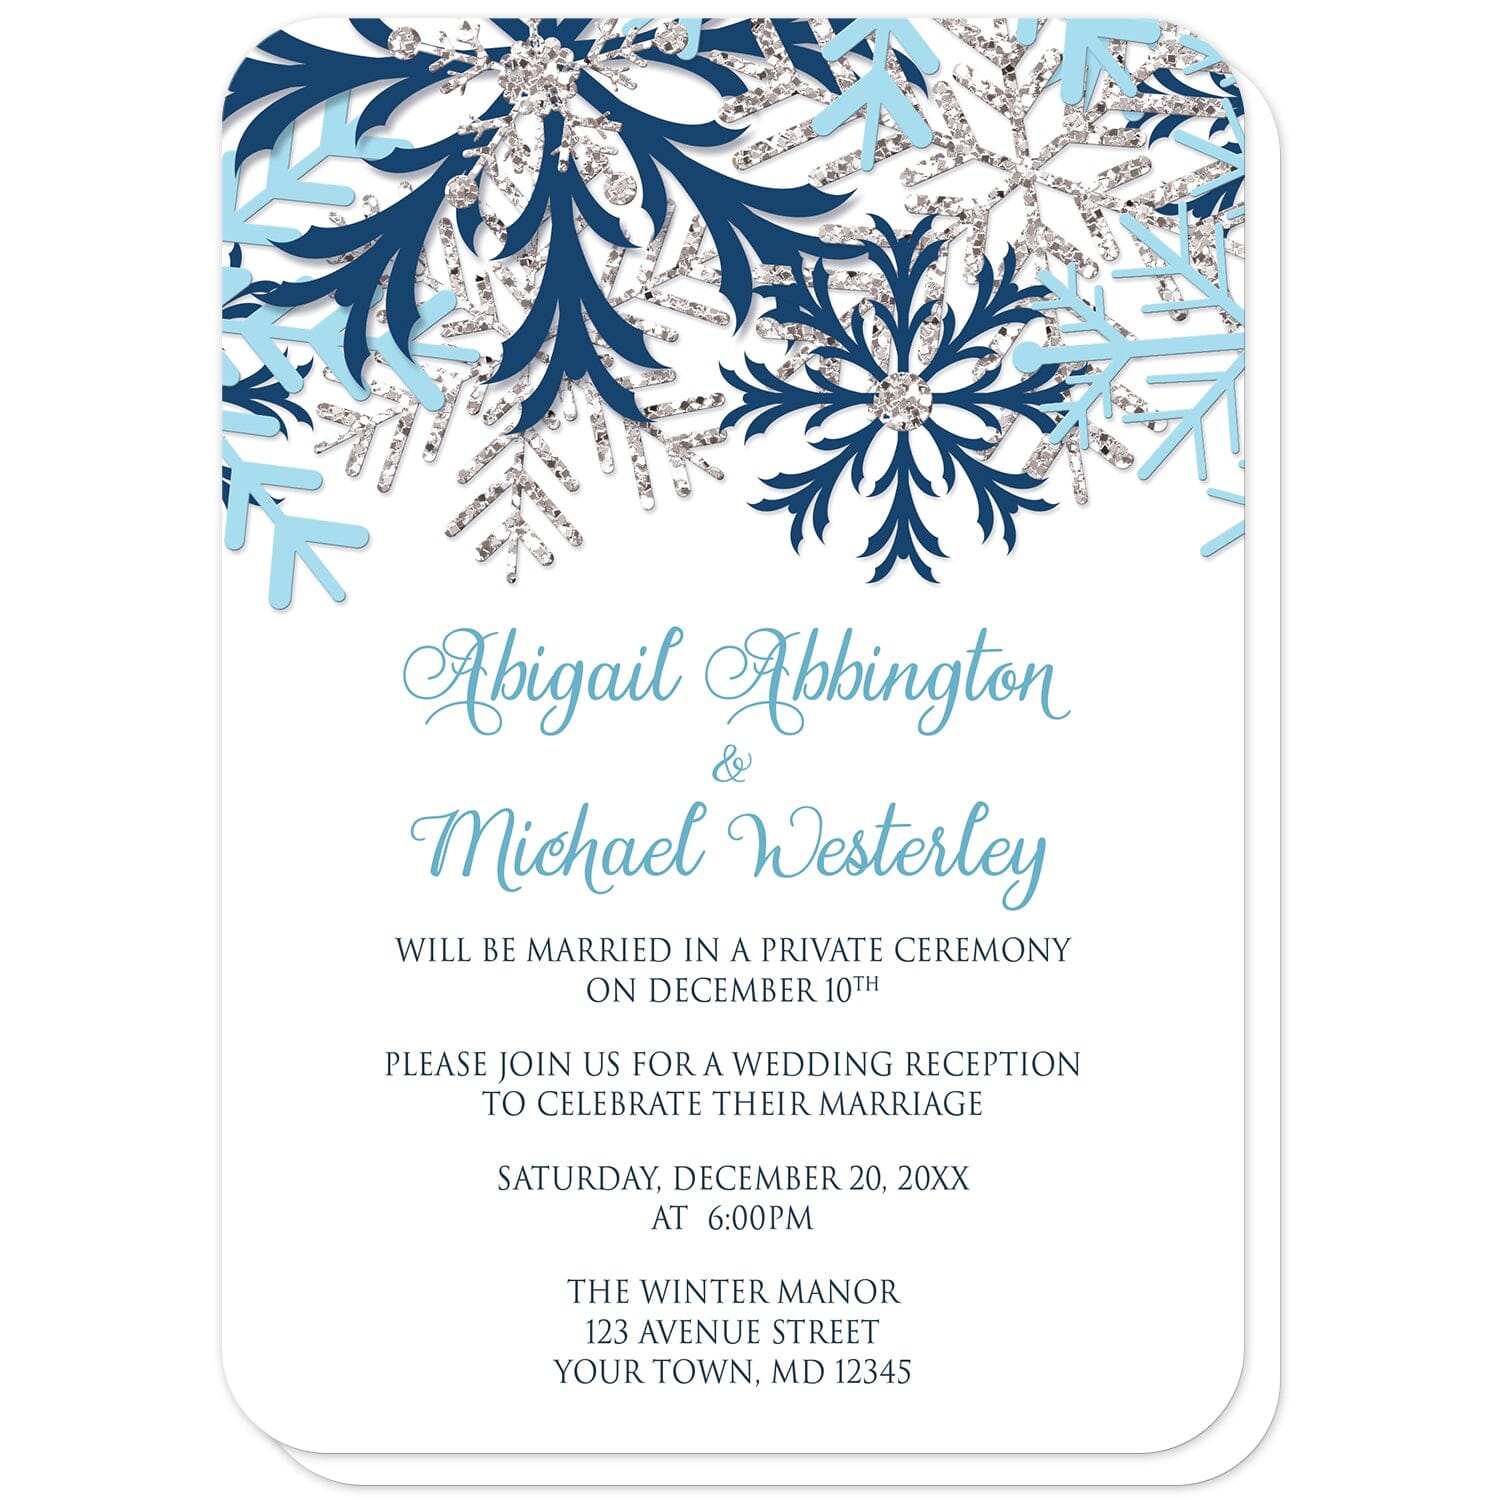 Winter Blue Silver Snowflake Reception Only Invitations (with rounded corners) at Artistically Invited. Beautiful winter blue silver snowflake reception only invitations designed with navy blue, aqua blue, and silver-colored glitter-illustrated snowflakes along the top over a white background. Your personalized post-wedding reception details are custom printed in blue and gray below the pretty snowflakes.